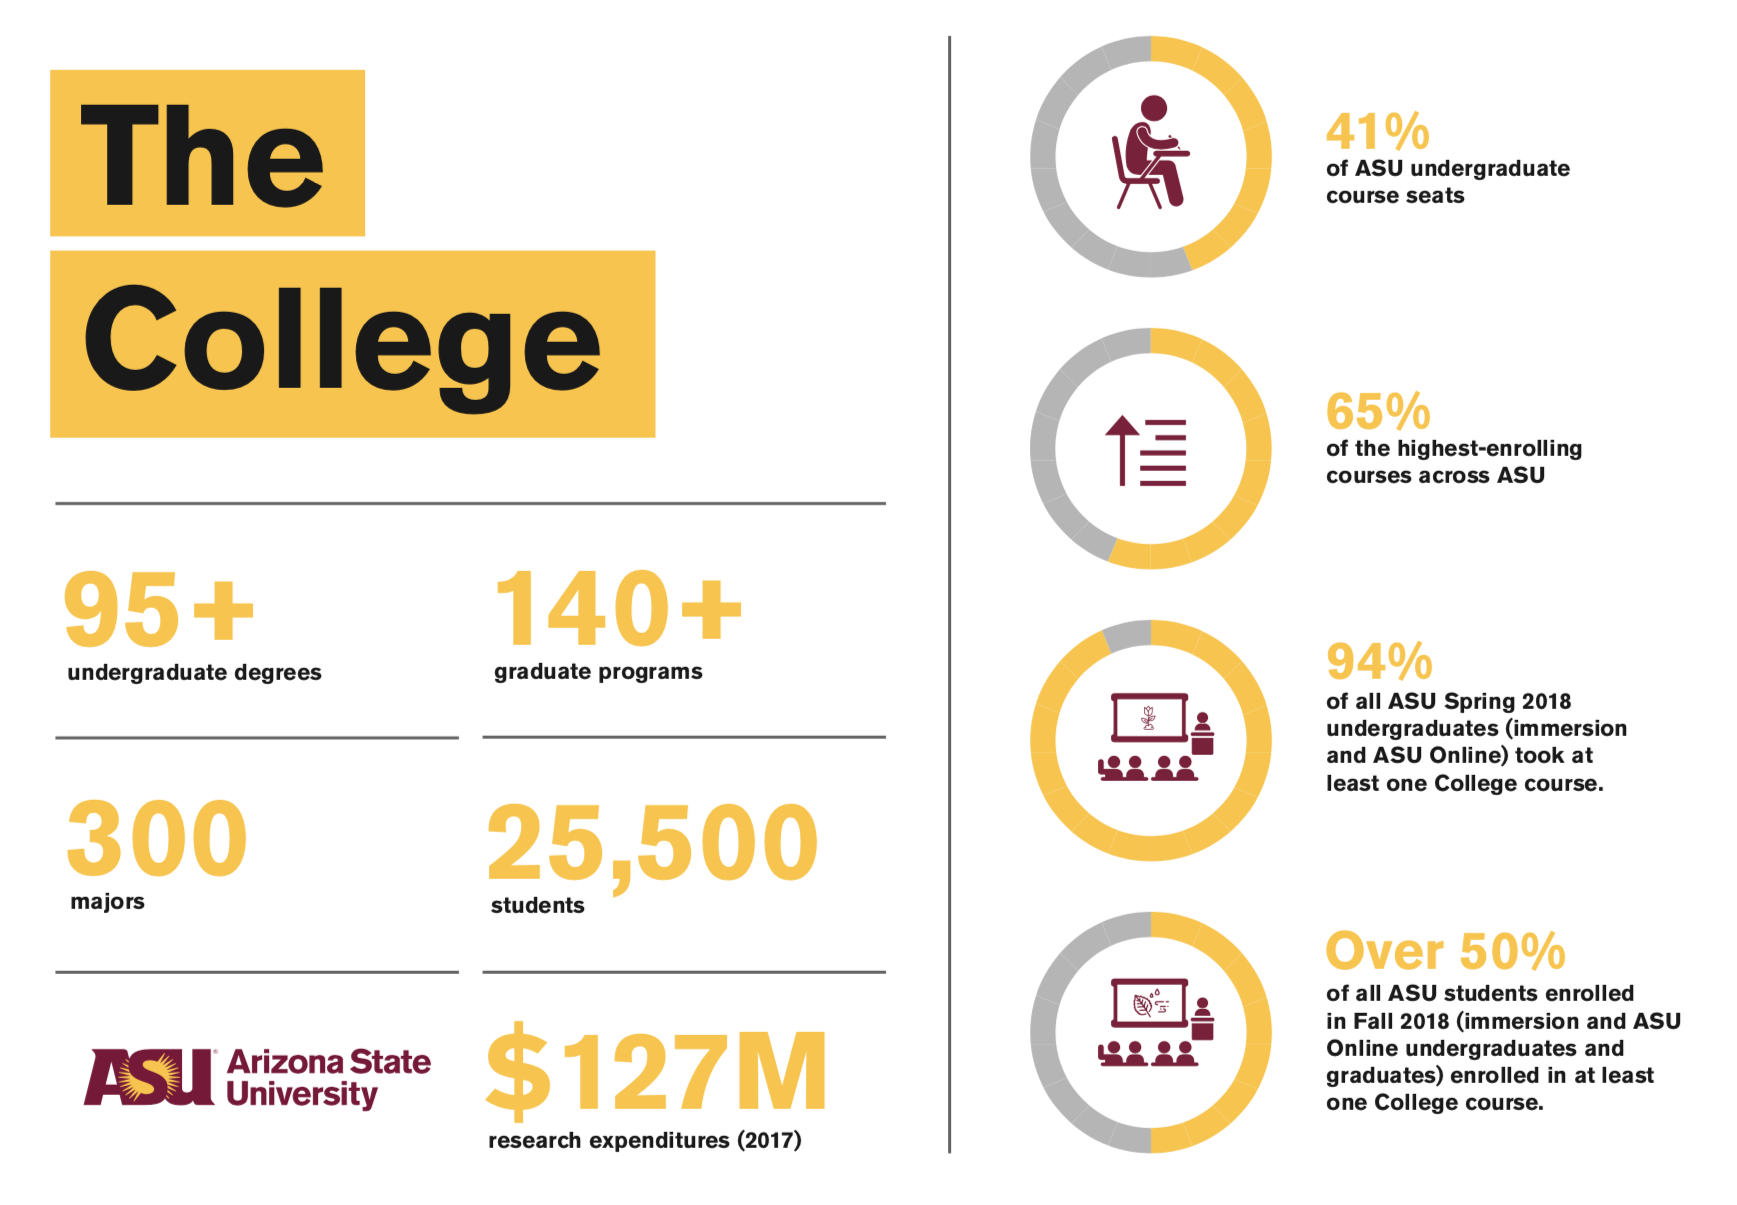 The College infographic